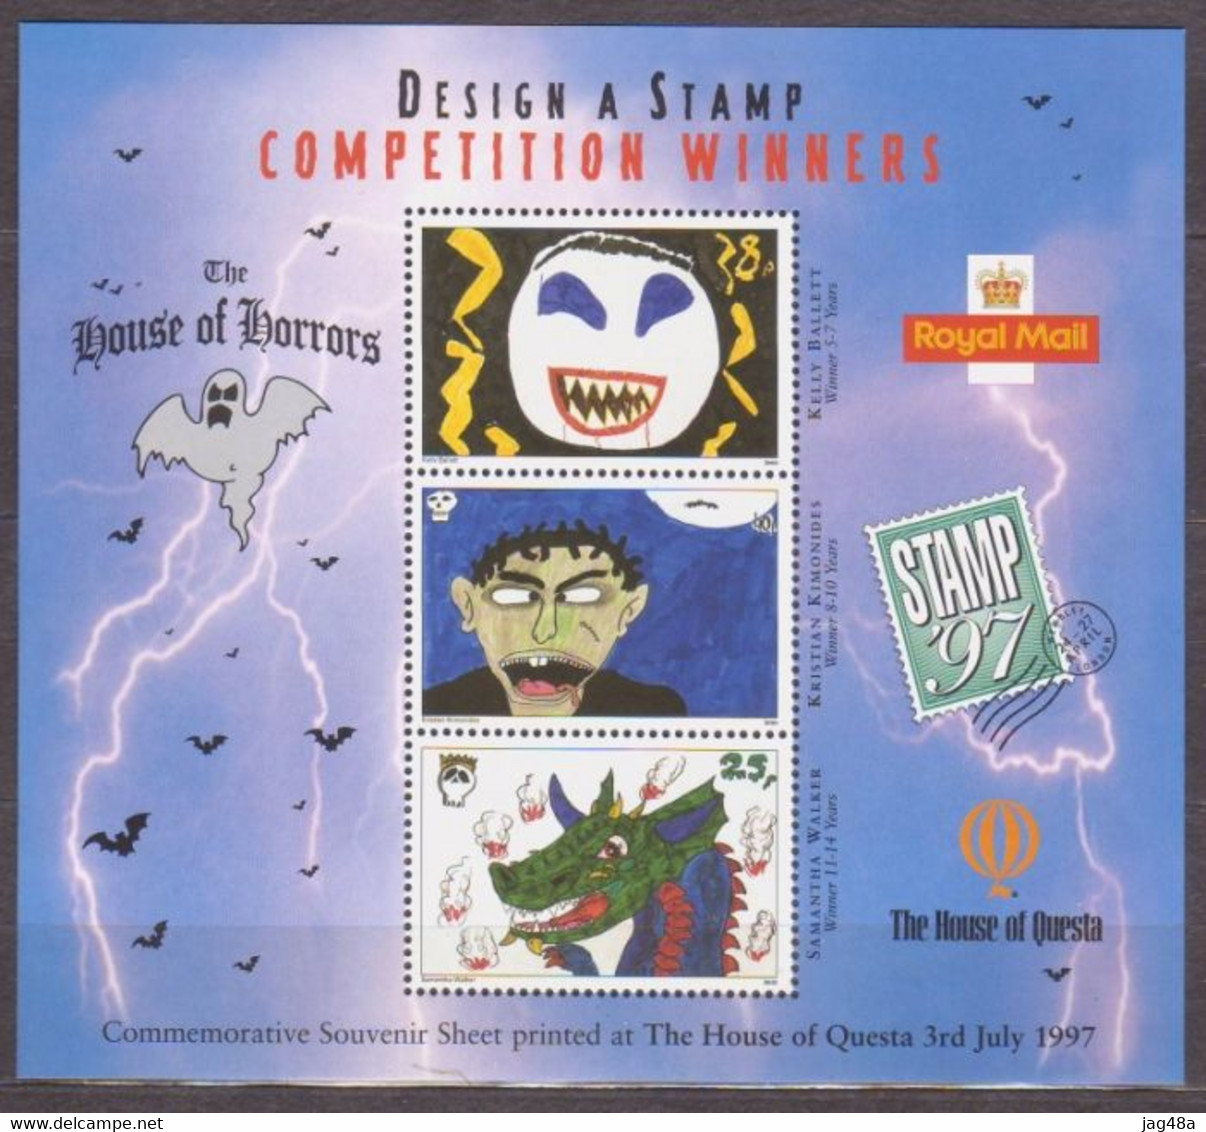 UNITED KINGDOM.  1997/Stamp'97 - Design A Stamp Competition Winners - Sheetlet/unused. - Smilers Sheets